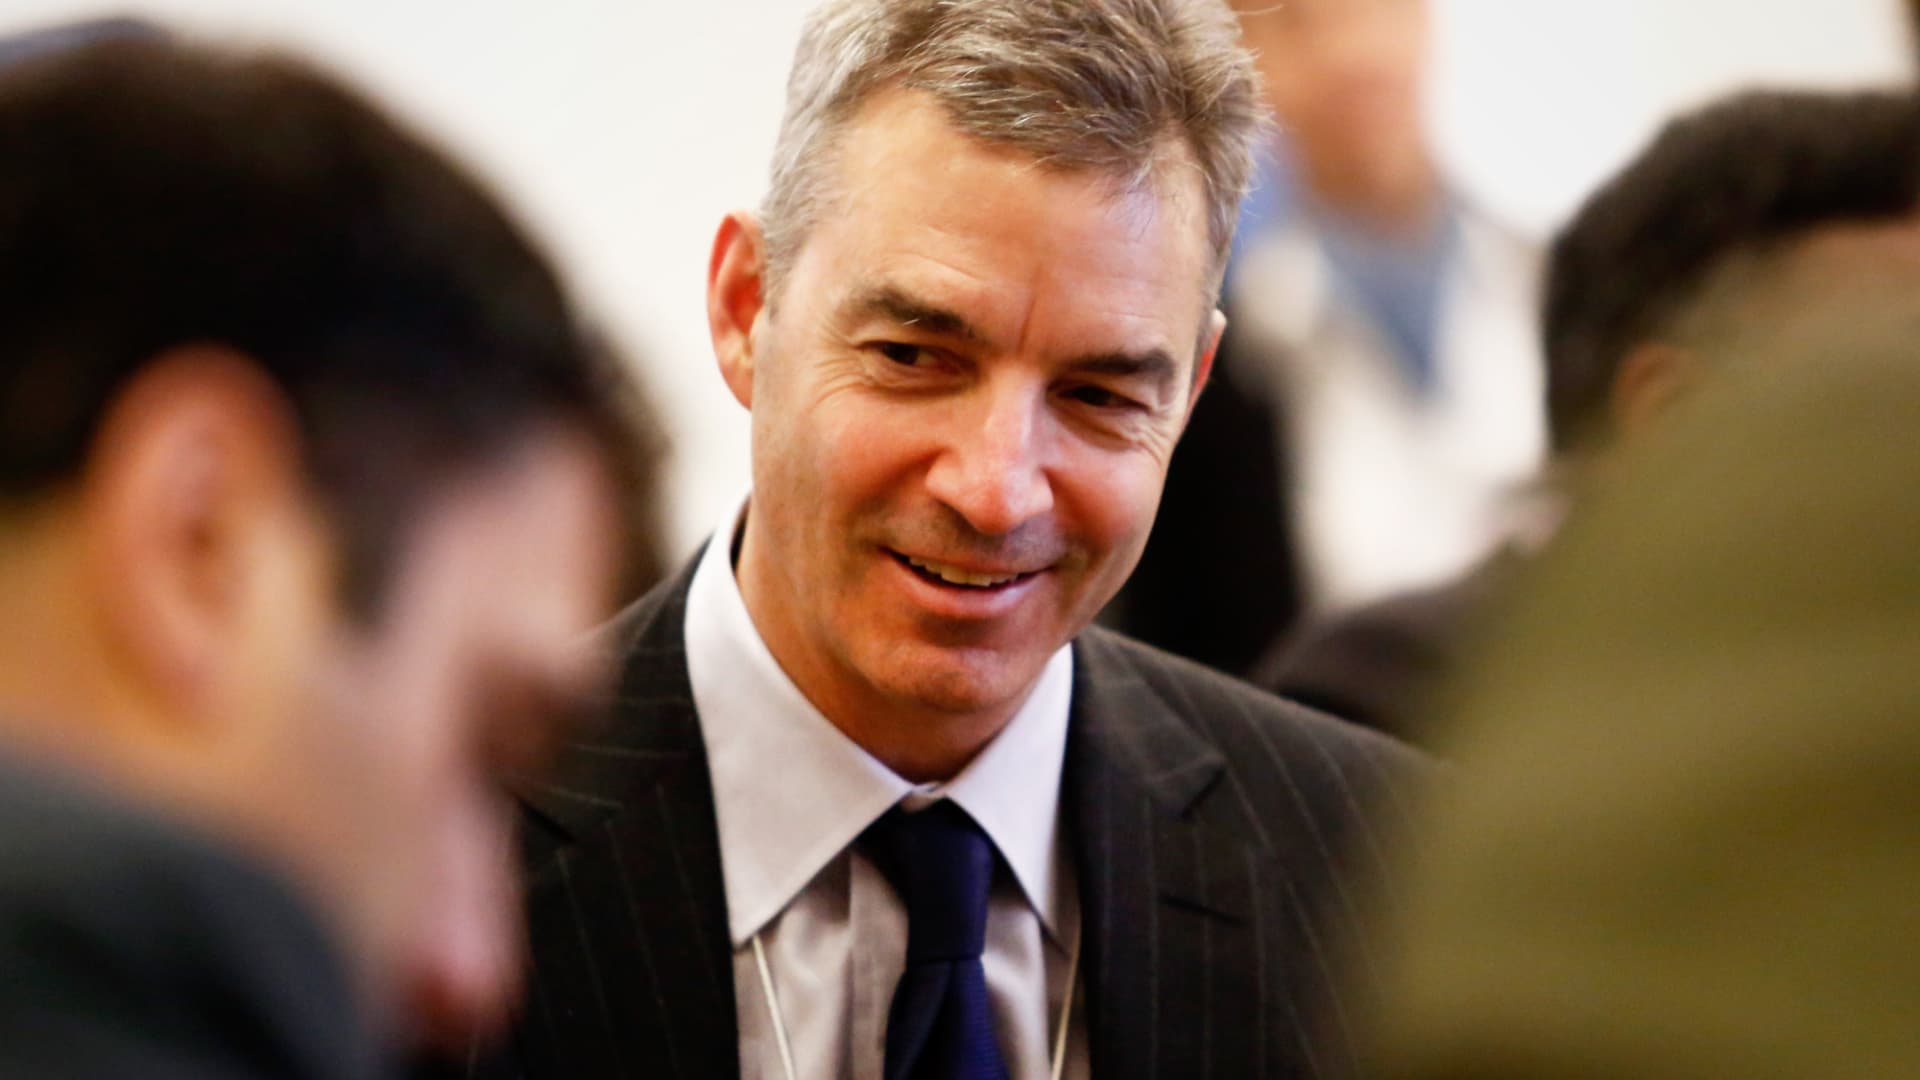 Dan Loeb's Third Point builds stake in Colgate, sees value in pet food business in potential spinoff